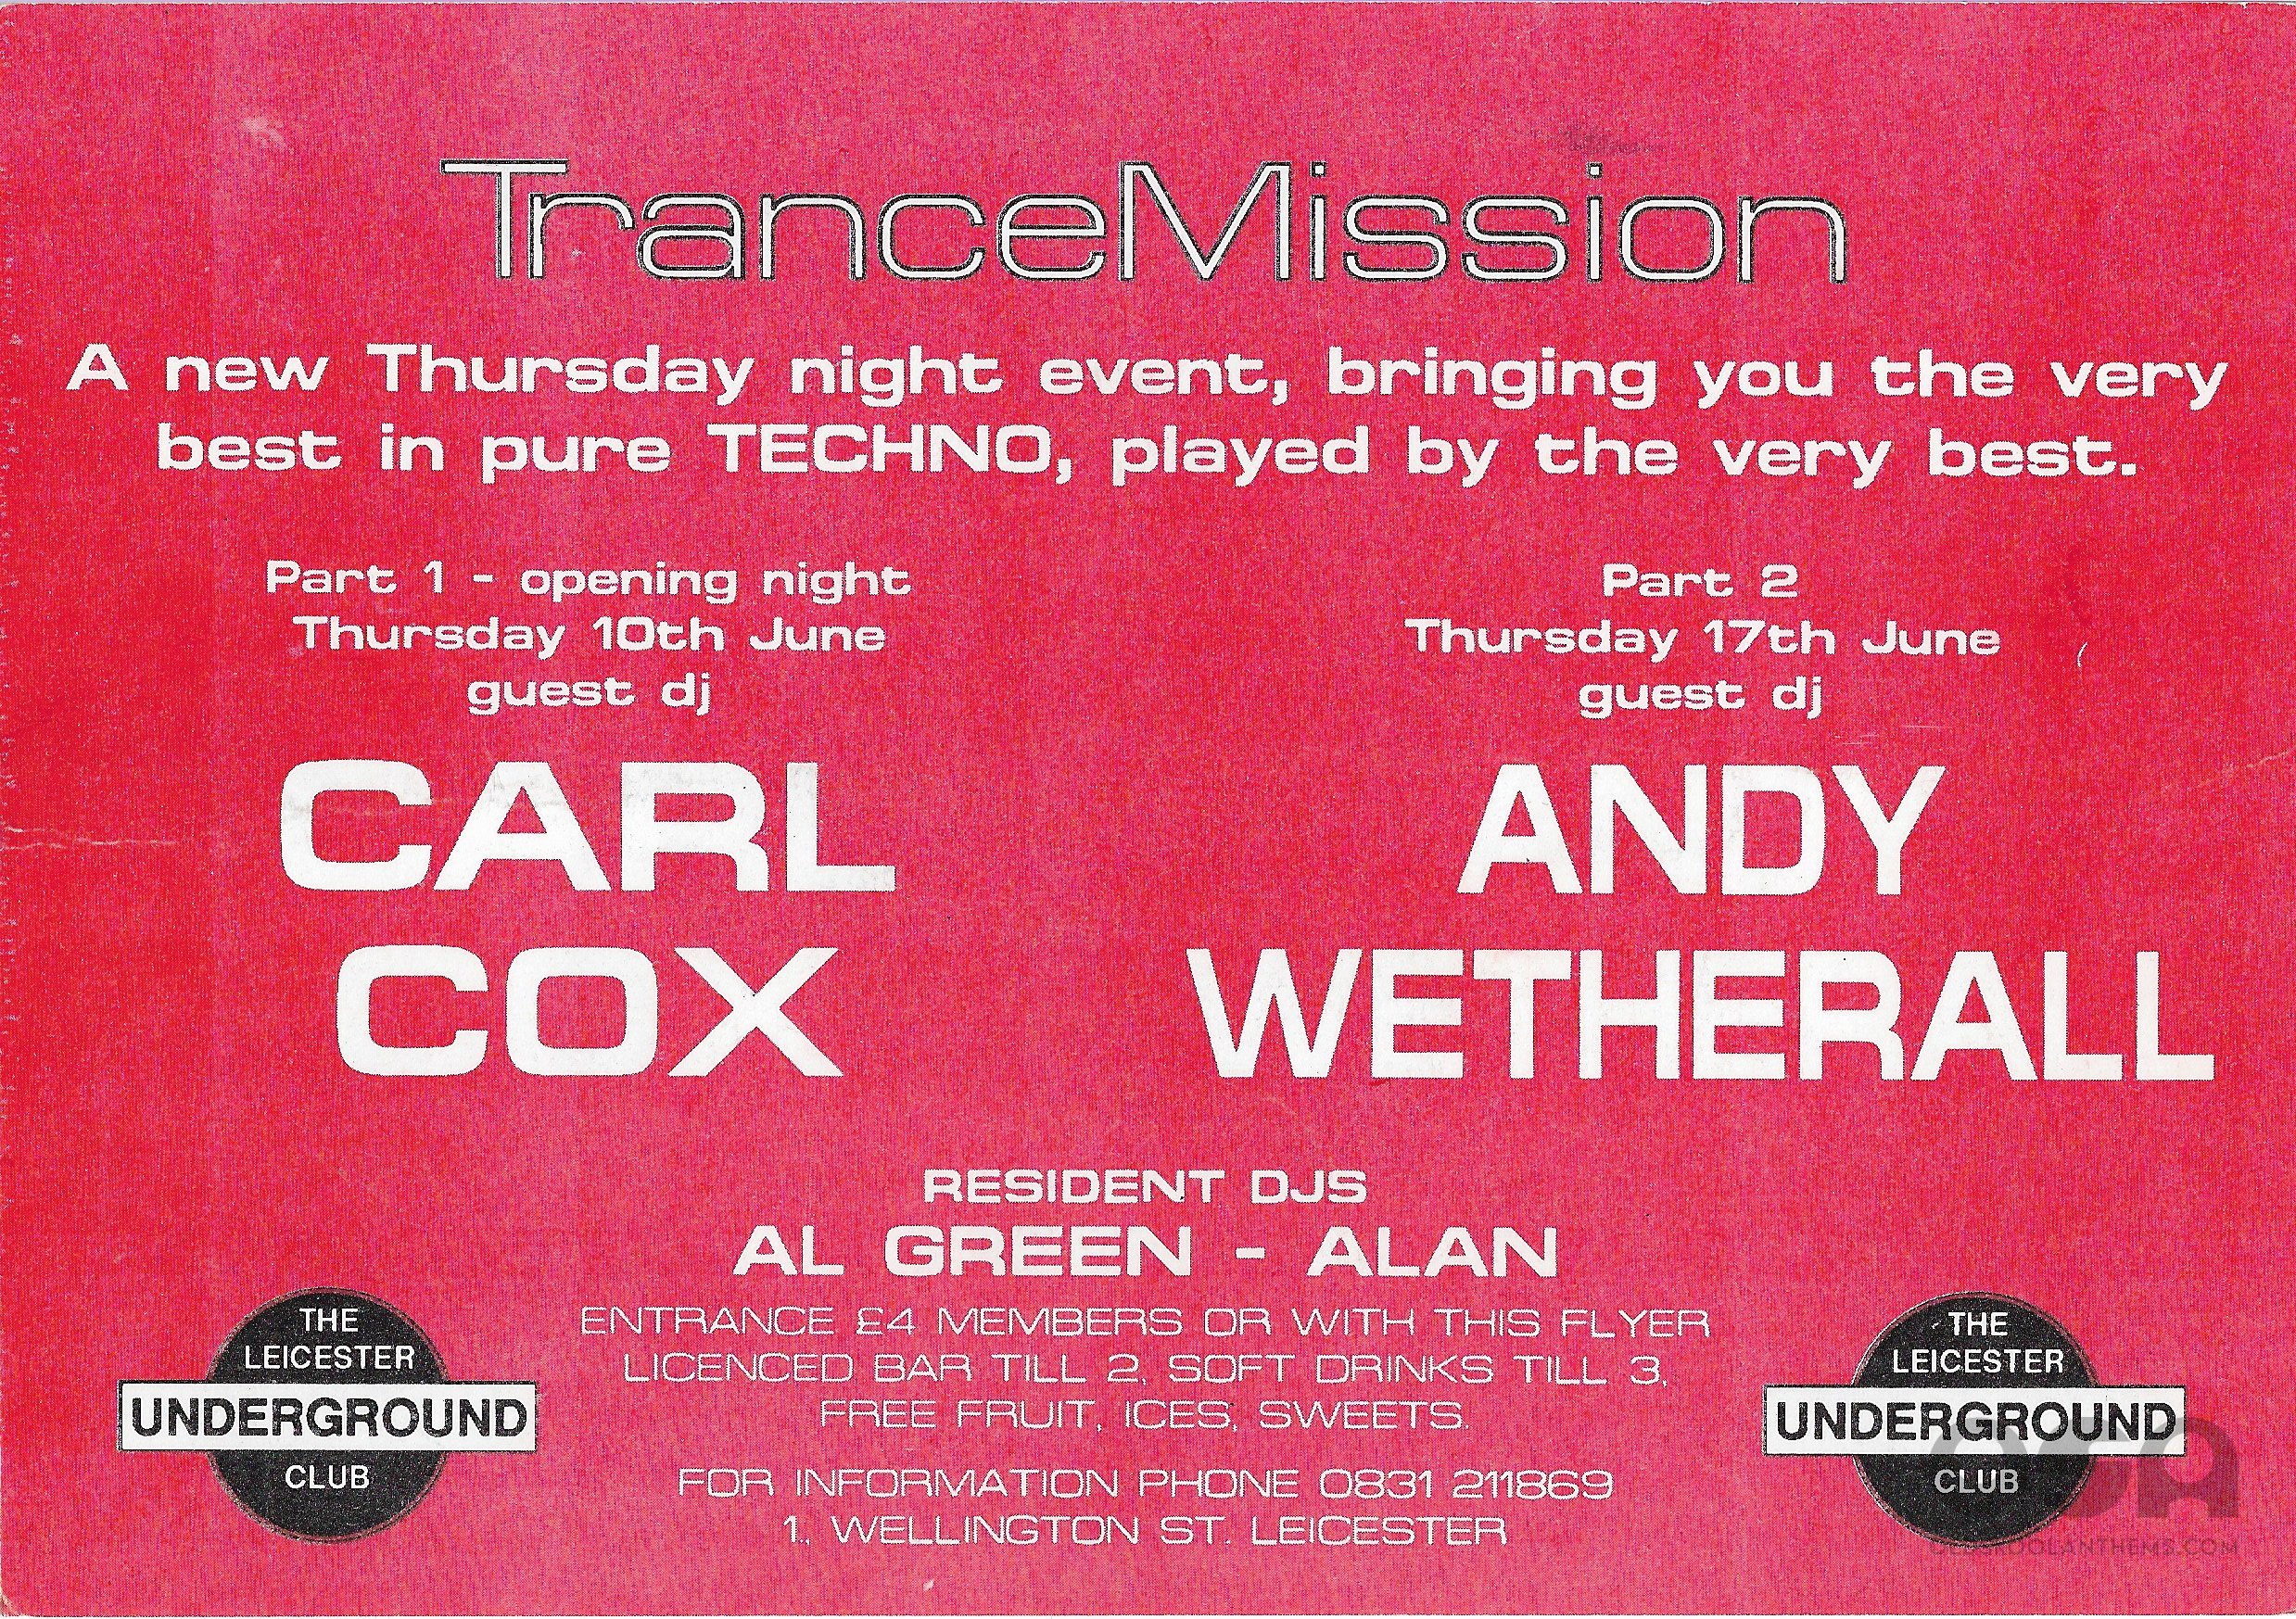 TranceMission @ The Leicester Underground Club - 10th June & 17th June 1993 - B .jpg